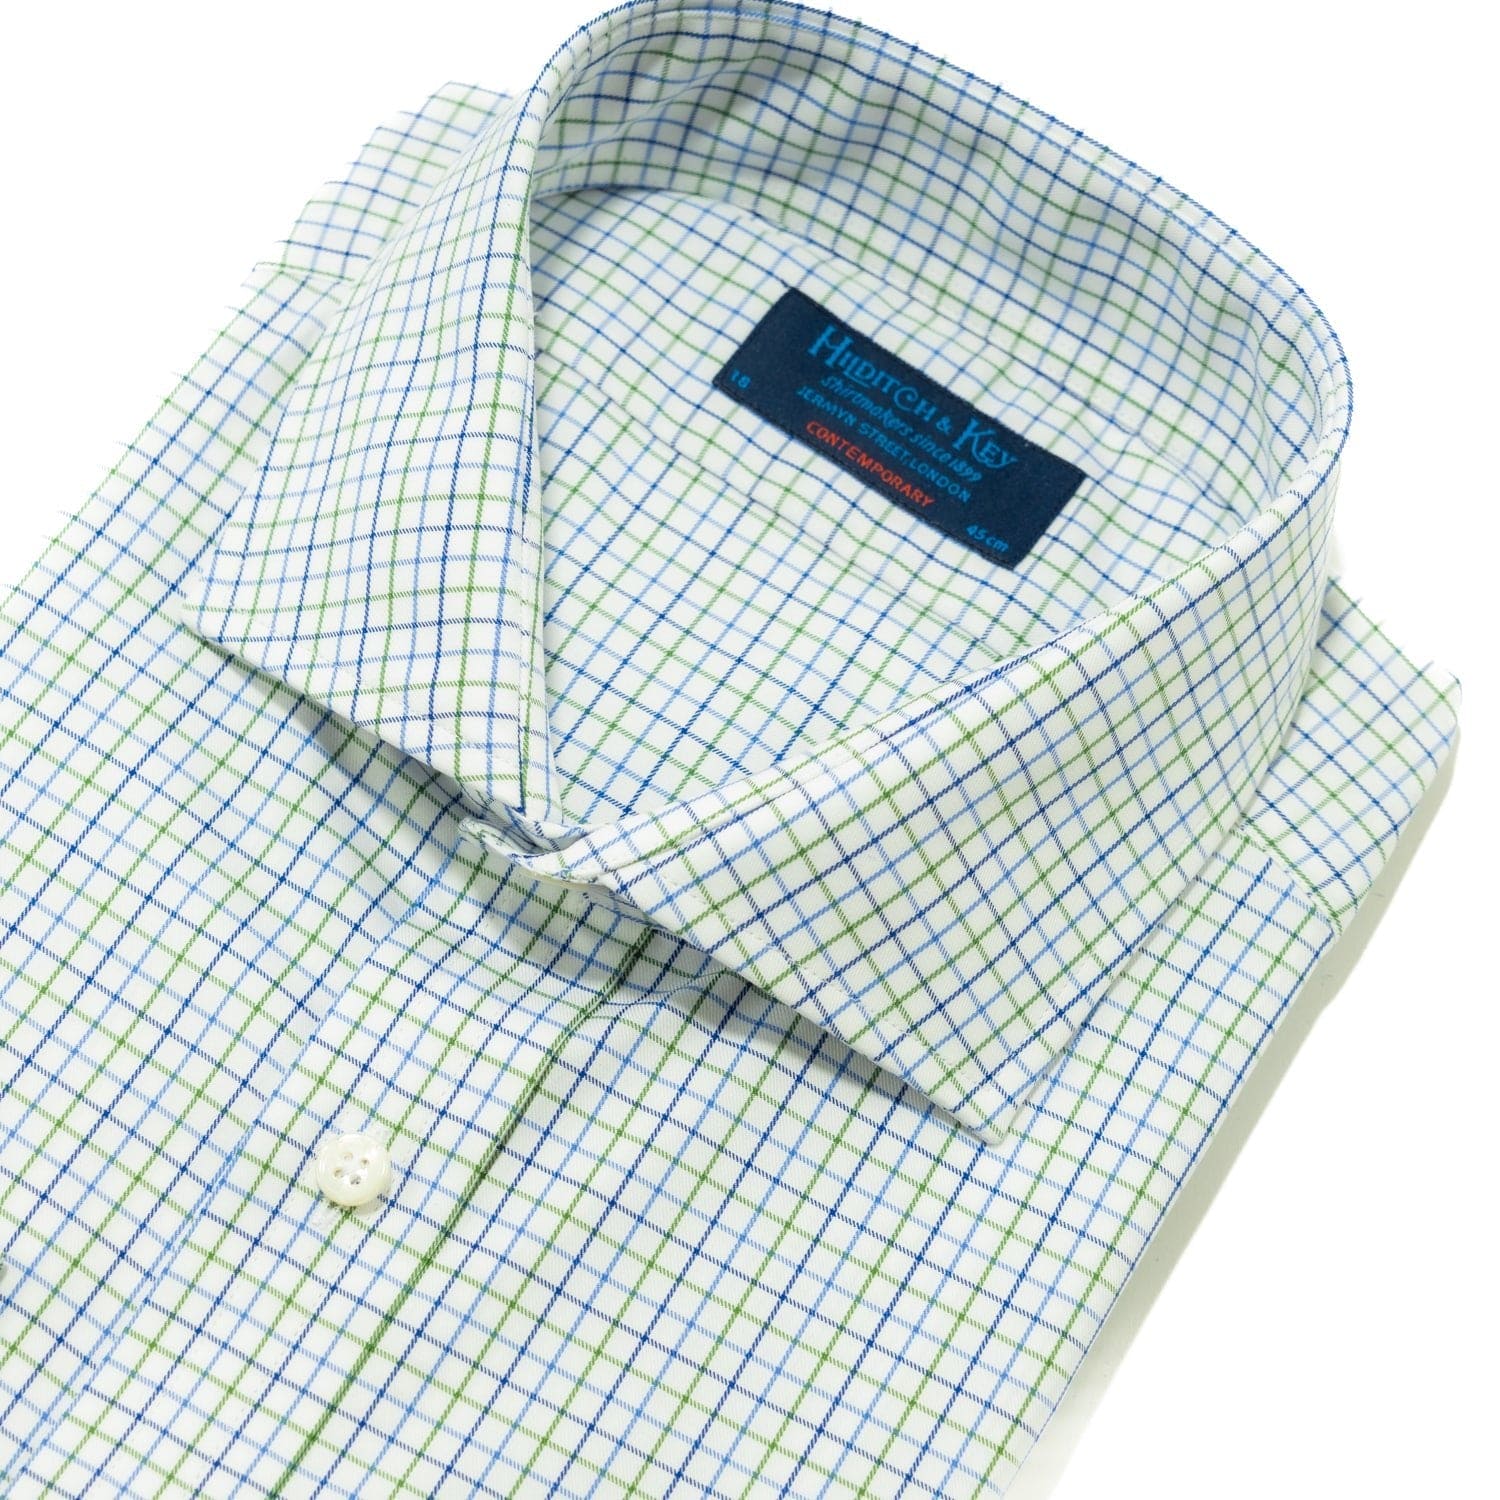 Contemporary Fit, Cutaway Collar, 2 Button Cuff Shirt in Green & Navy Twill Check